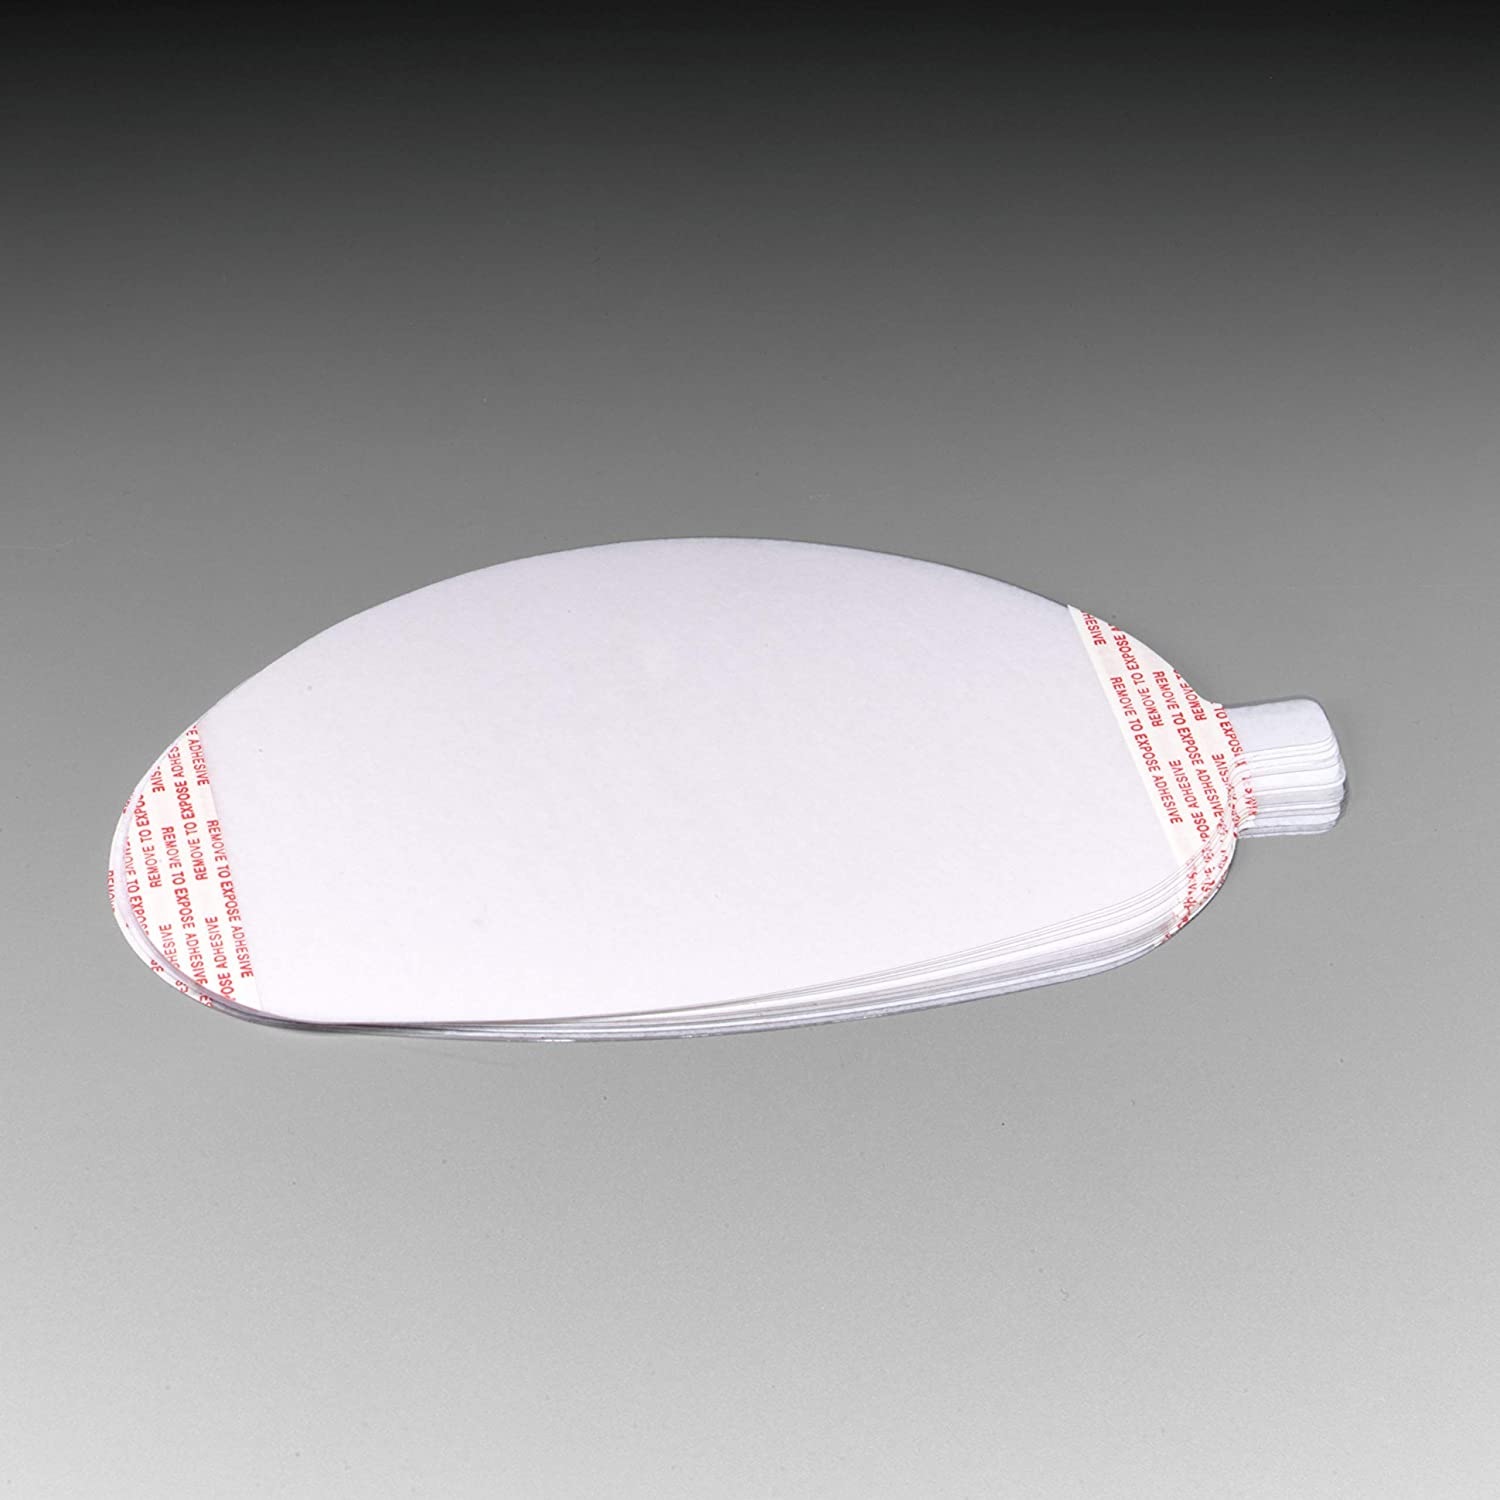 LENS COVER FOR 7000 SERIES RESPIRATORS - Accessories